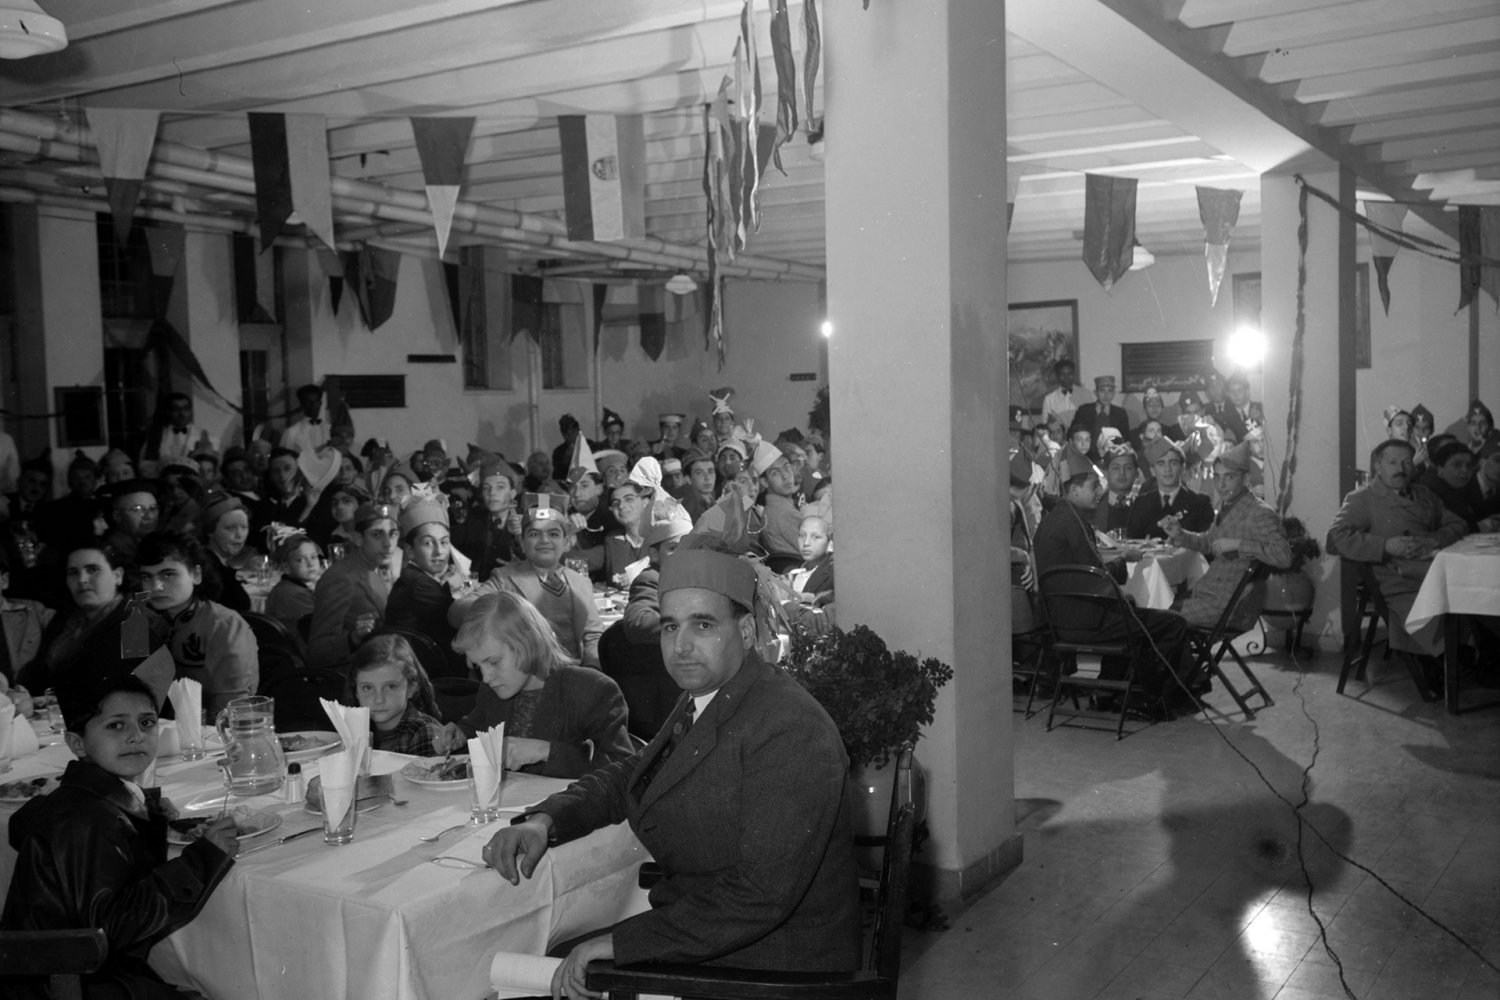 A banquet for families at the Jerusalem YMCA, January 9, 1940